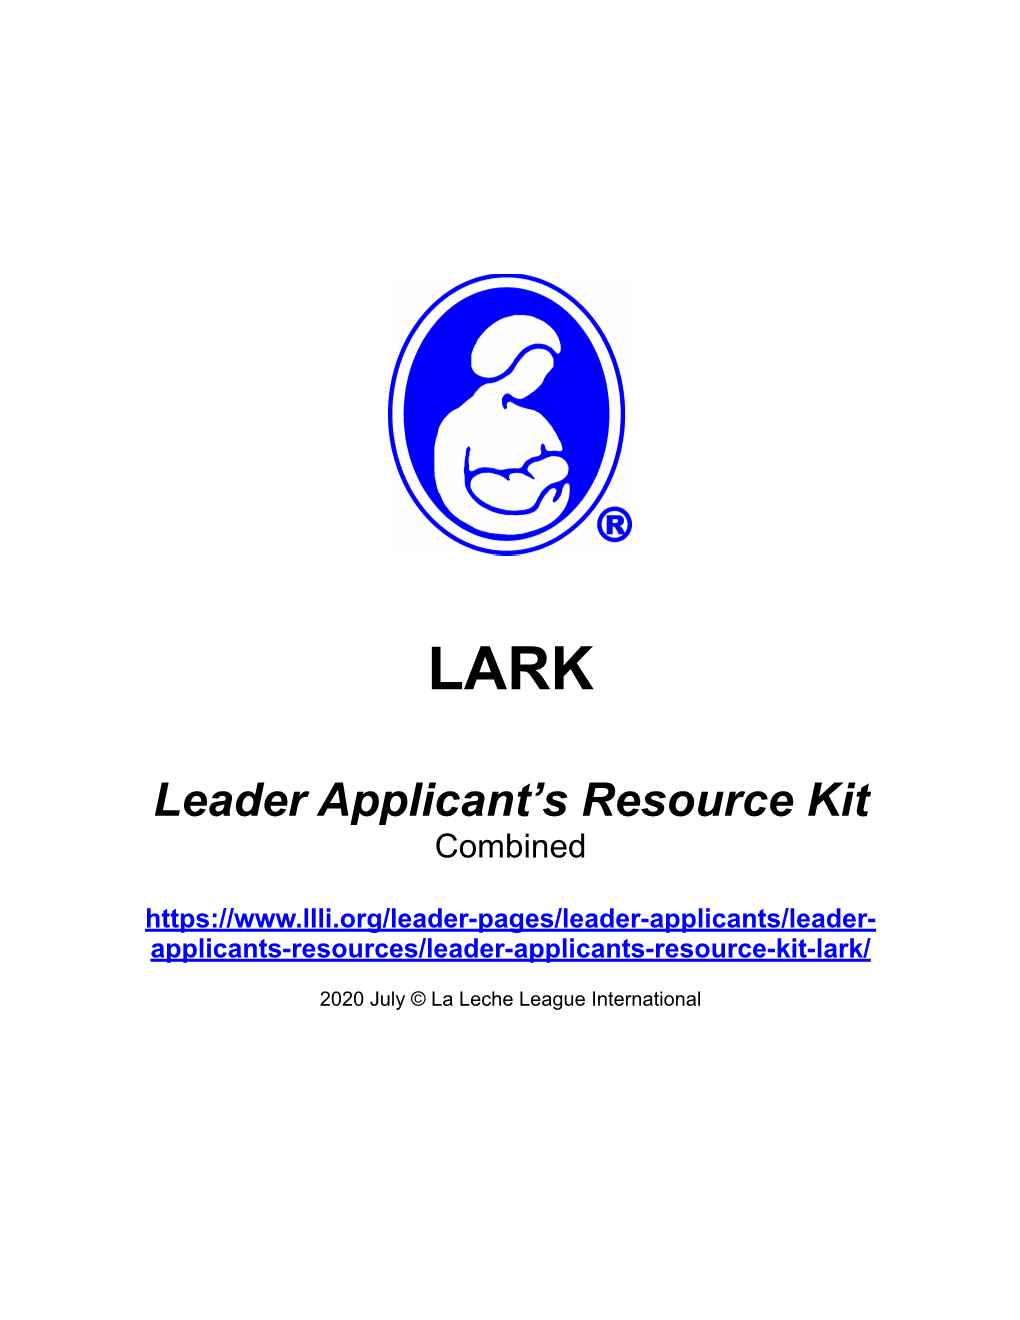 LARK Applicant Combined 2020 July